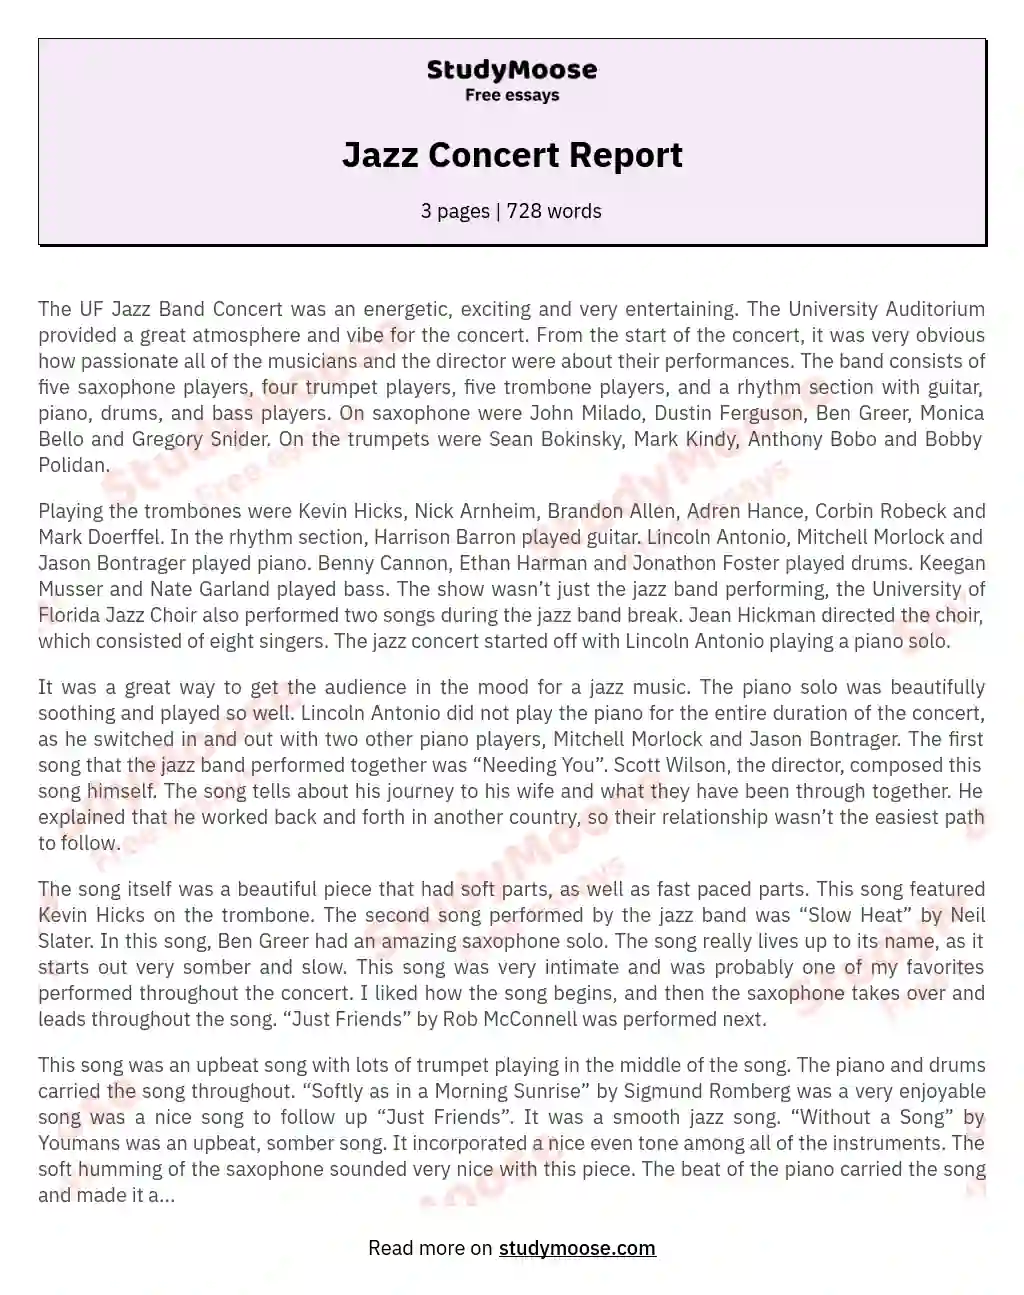 Musical Tapestry of the UF Jazz Band Concert essay